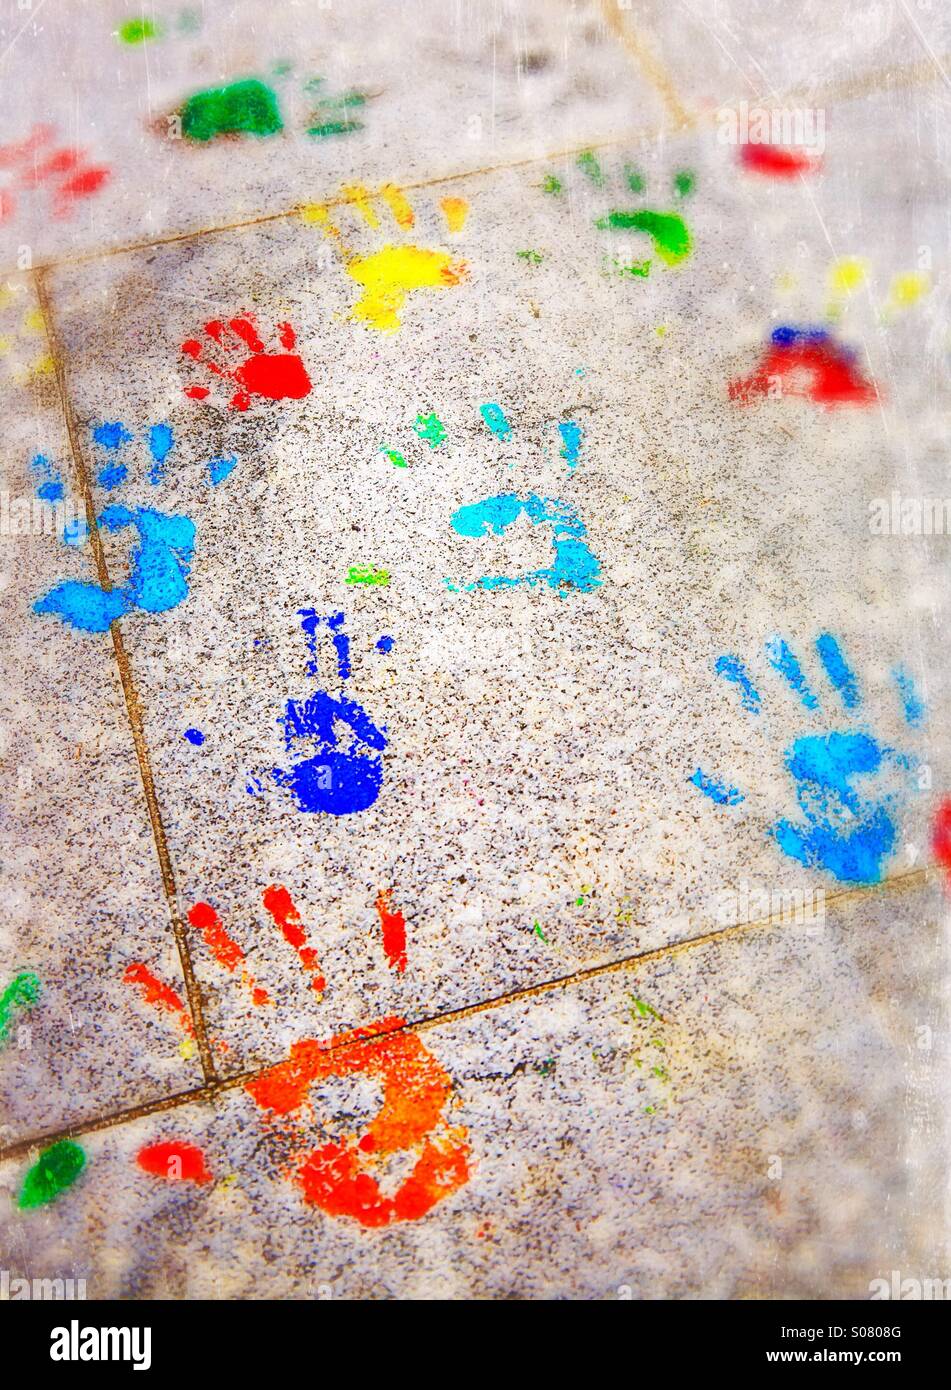 Children's hand prints in bright paint colours Stock Photo